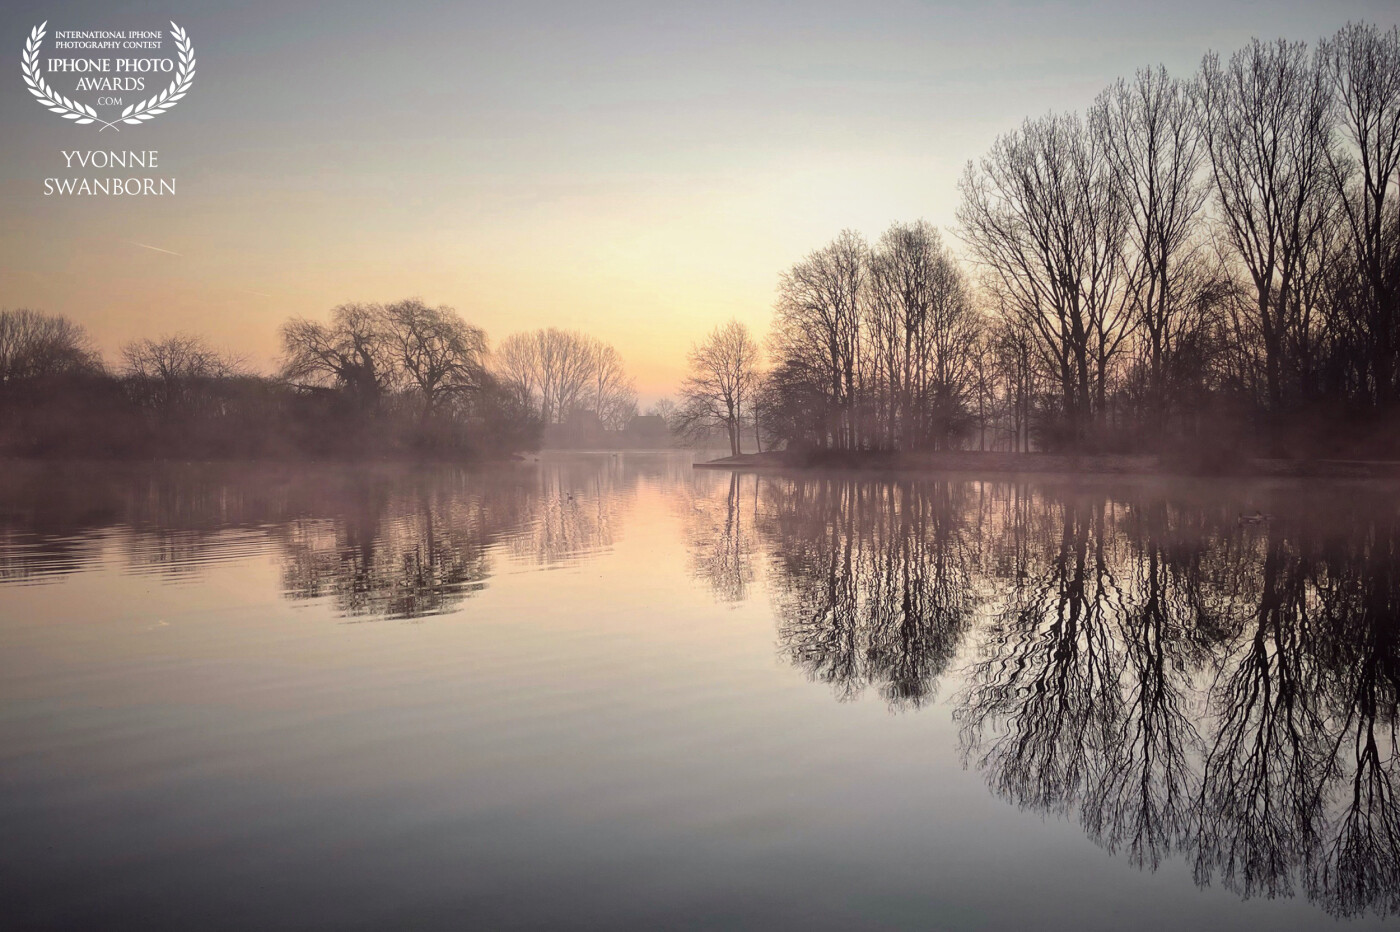 Walking my dog on a cold misty morning. I loved the mist and the reflections.